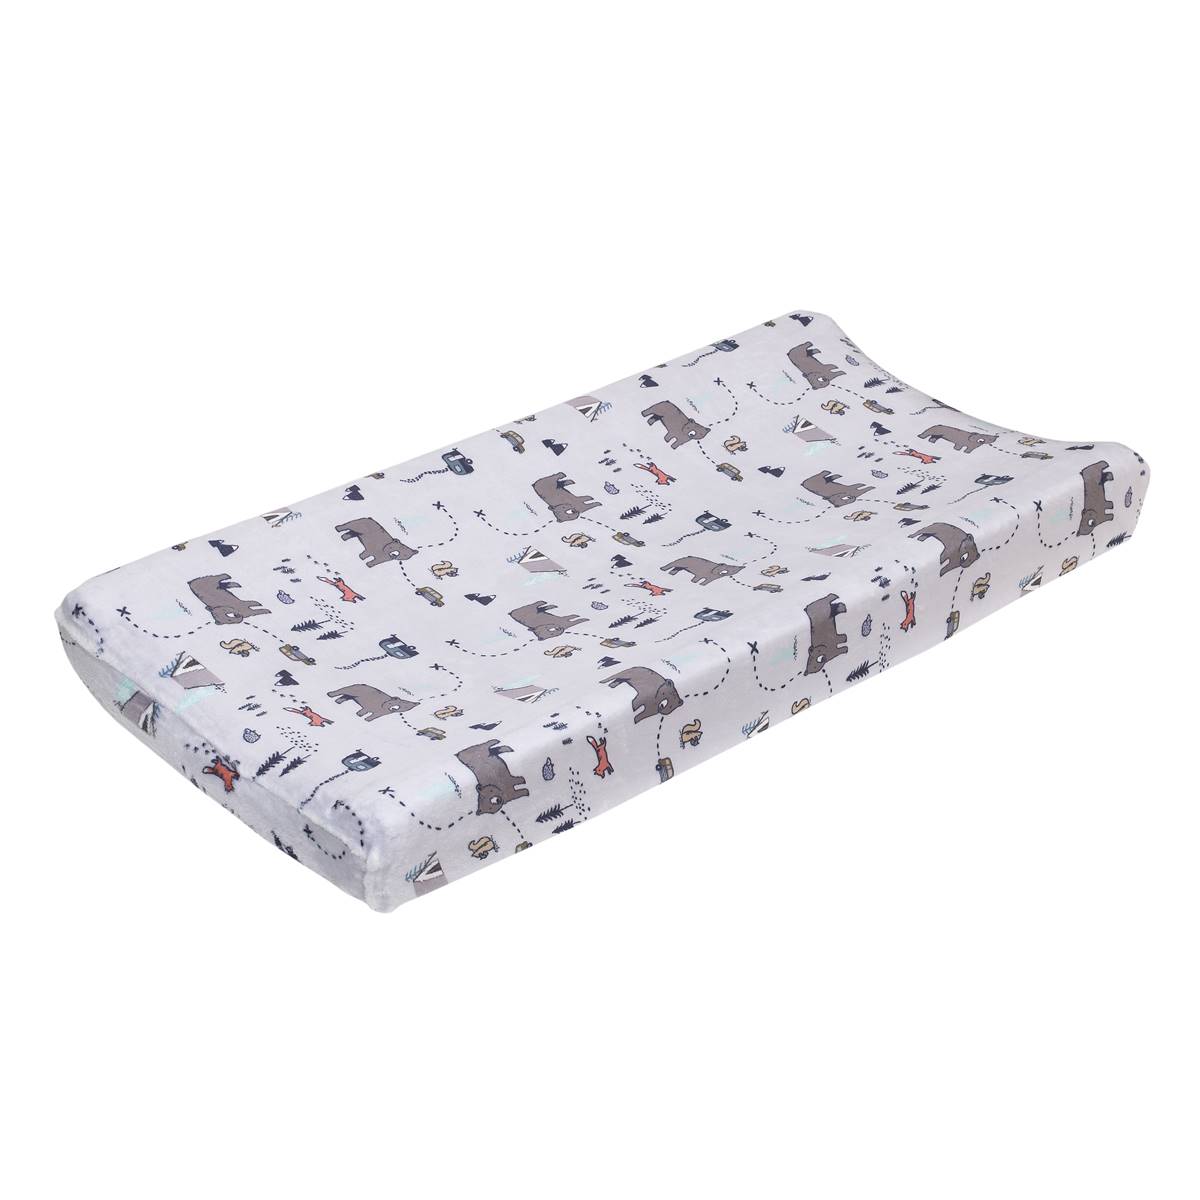 Carters(R) Woodland Friends Super Soft Changing Pad Cover